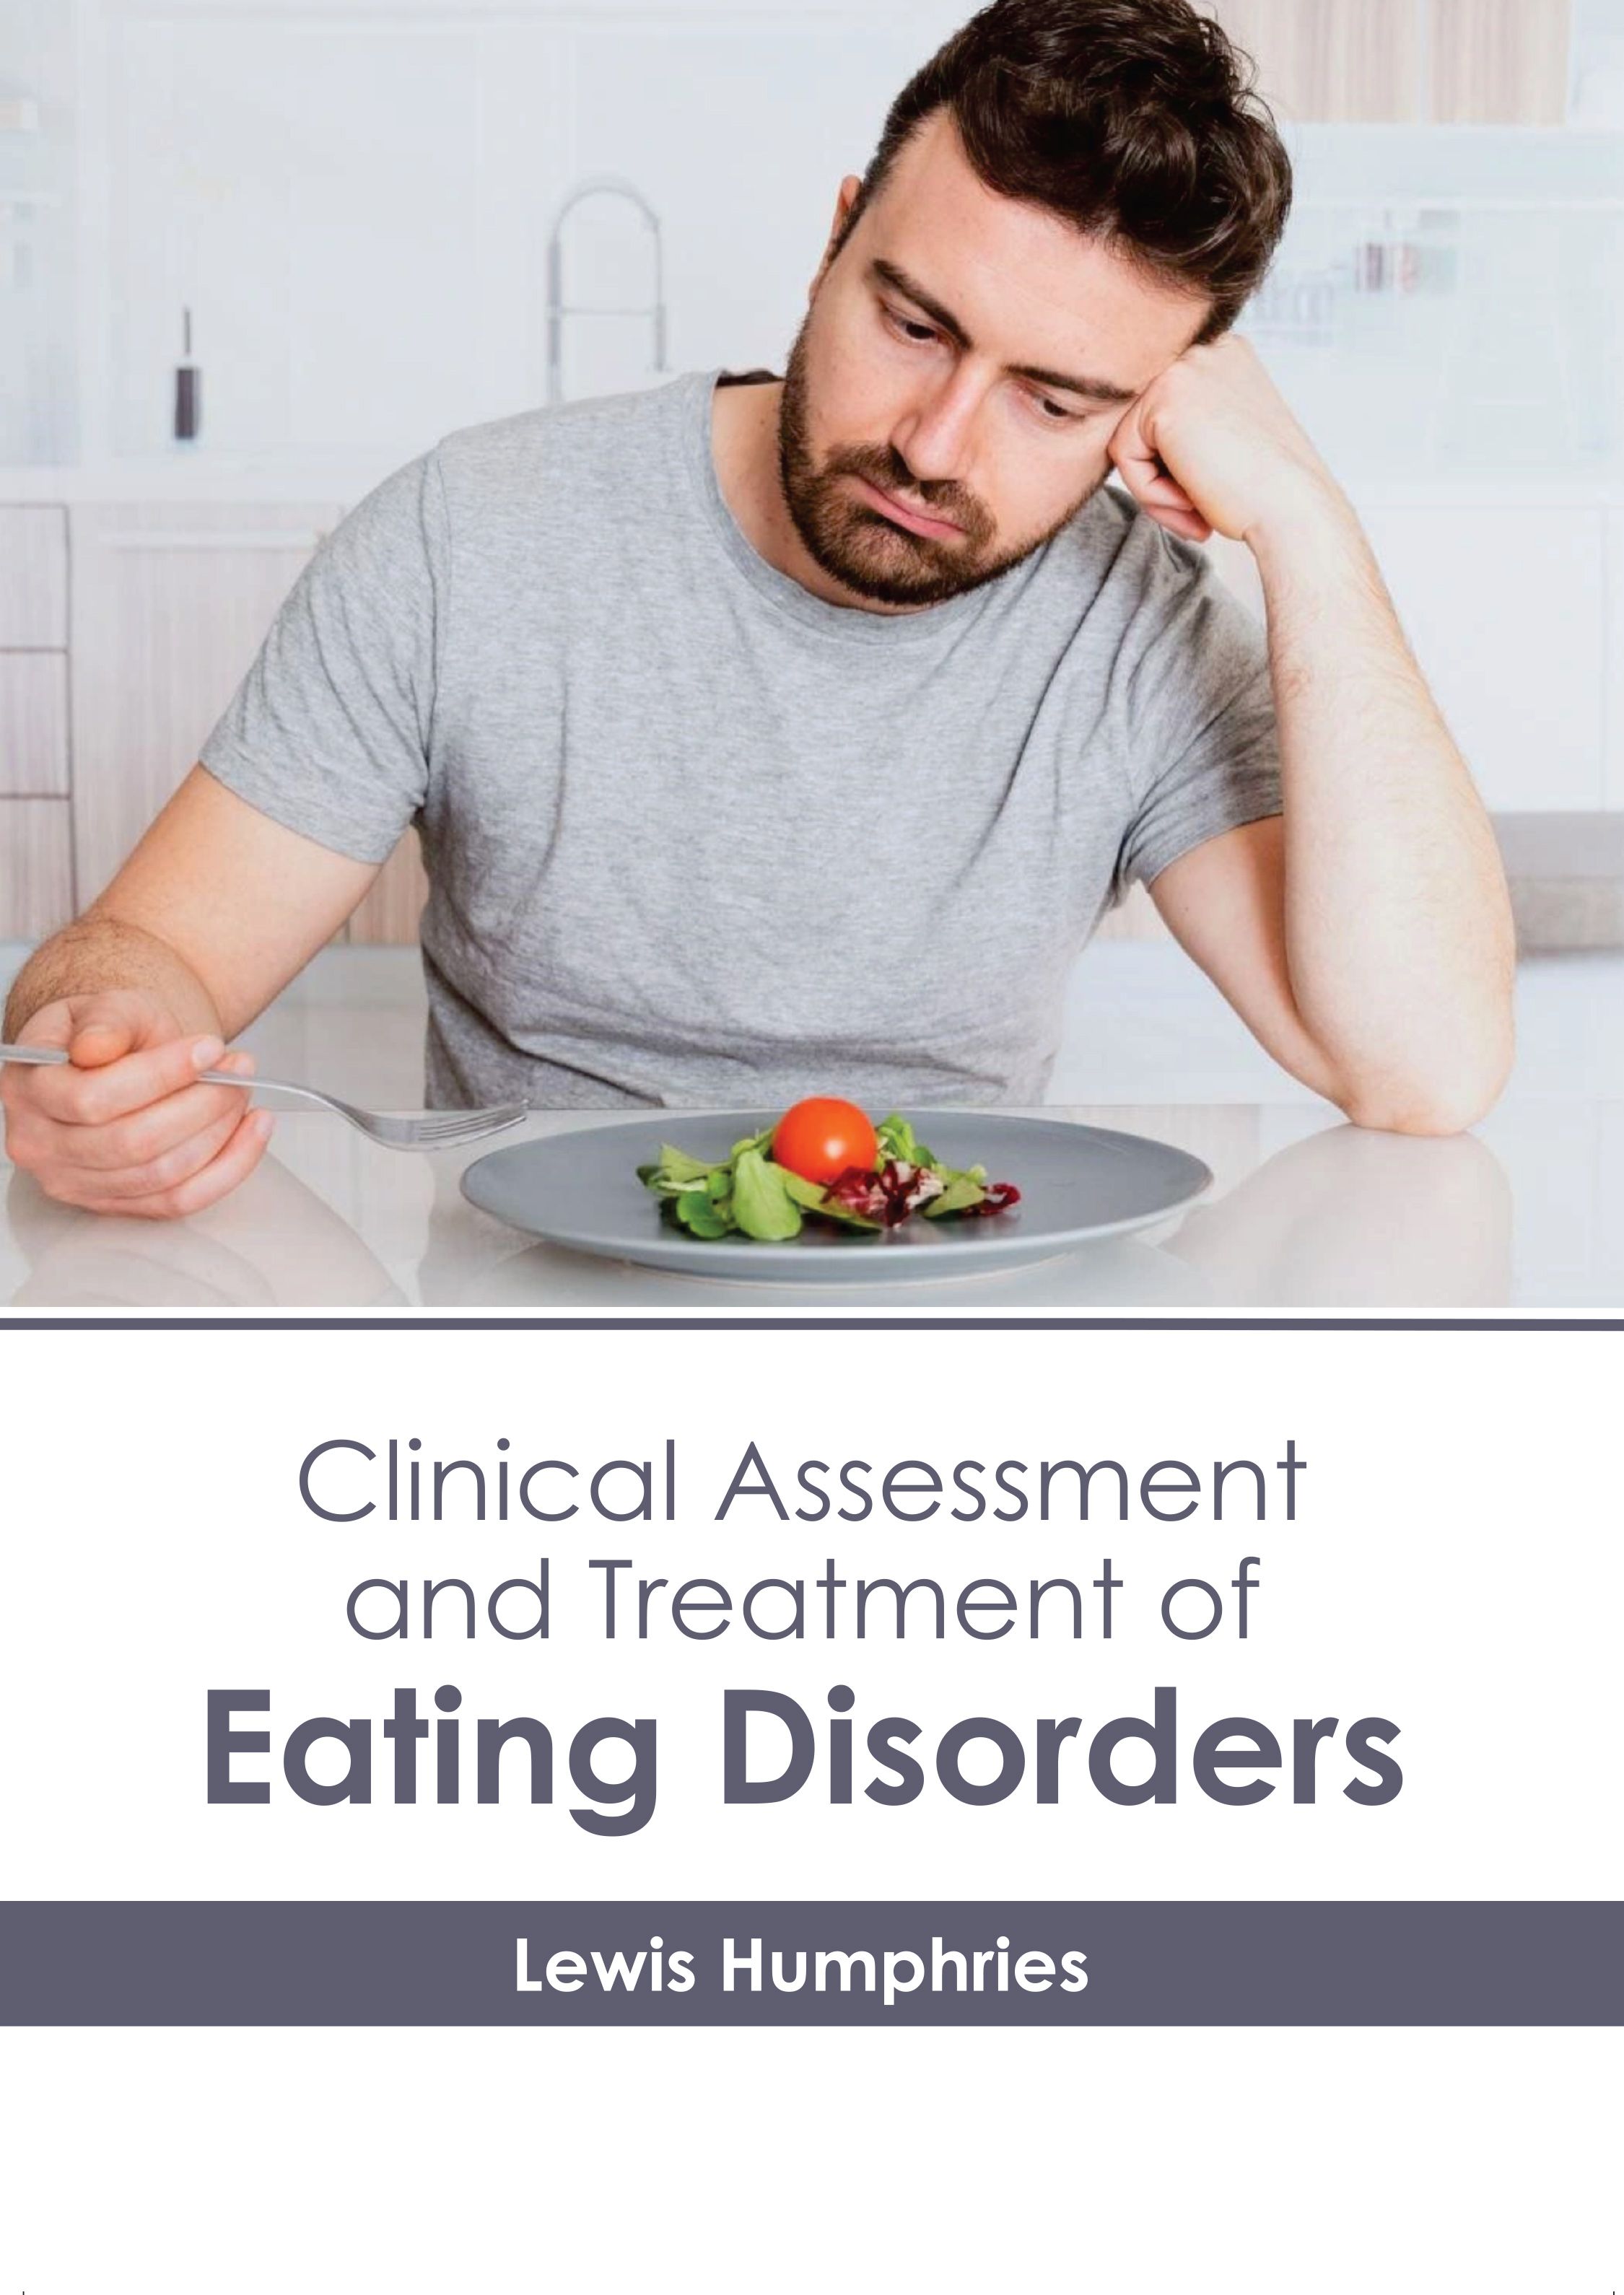 

exclusive-publishers/american-medical-publishers/clinical-assessment-and-treatment-of-eating-disorders-9781639279890